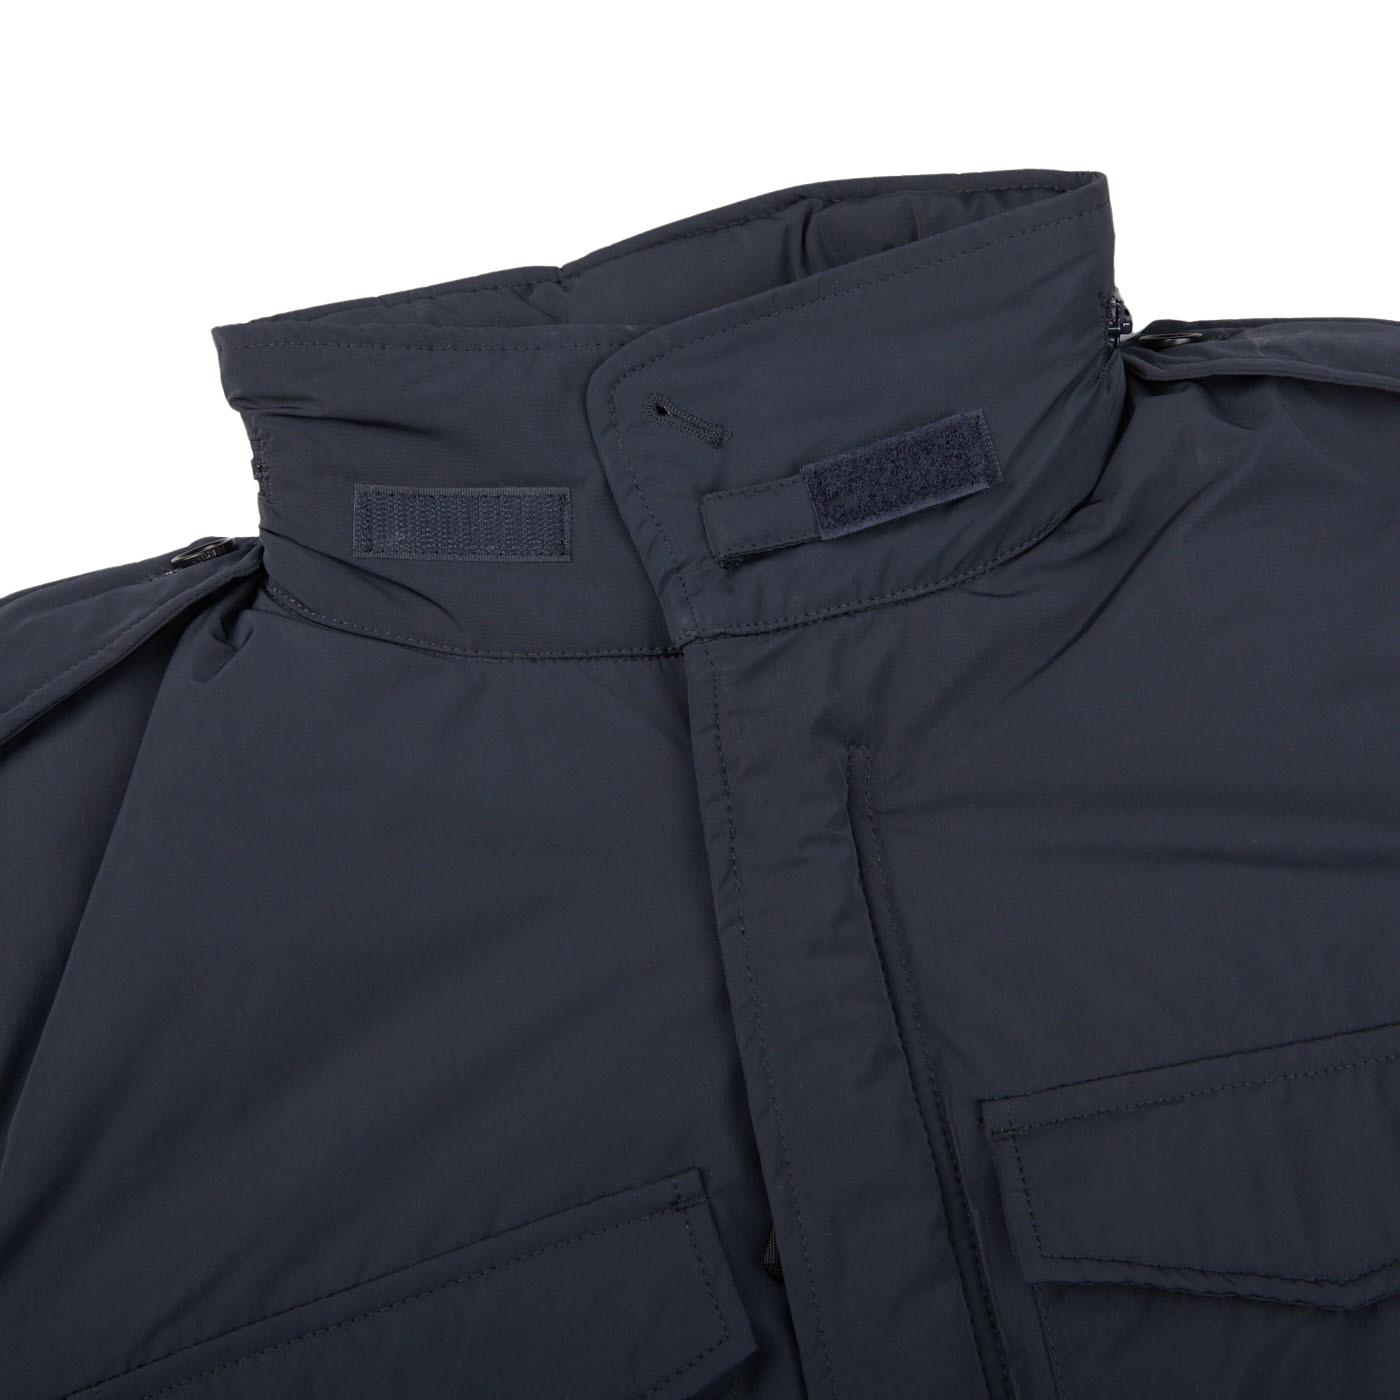 A close up of an Aspesi navy blue Nylon Padded Field Jacket on a white background.